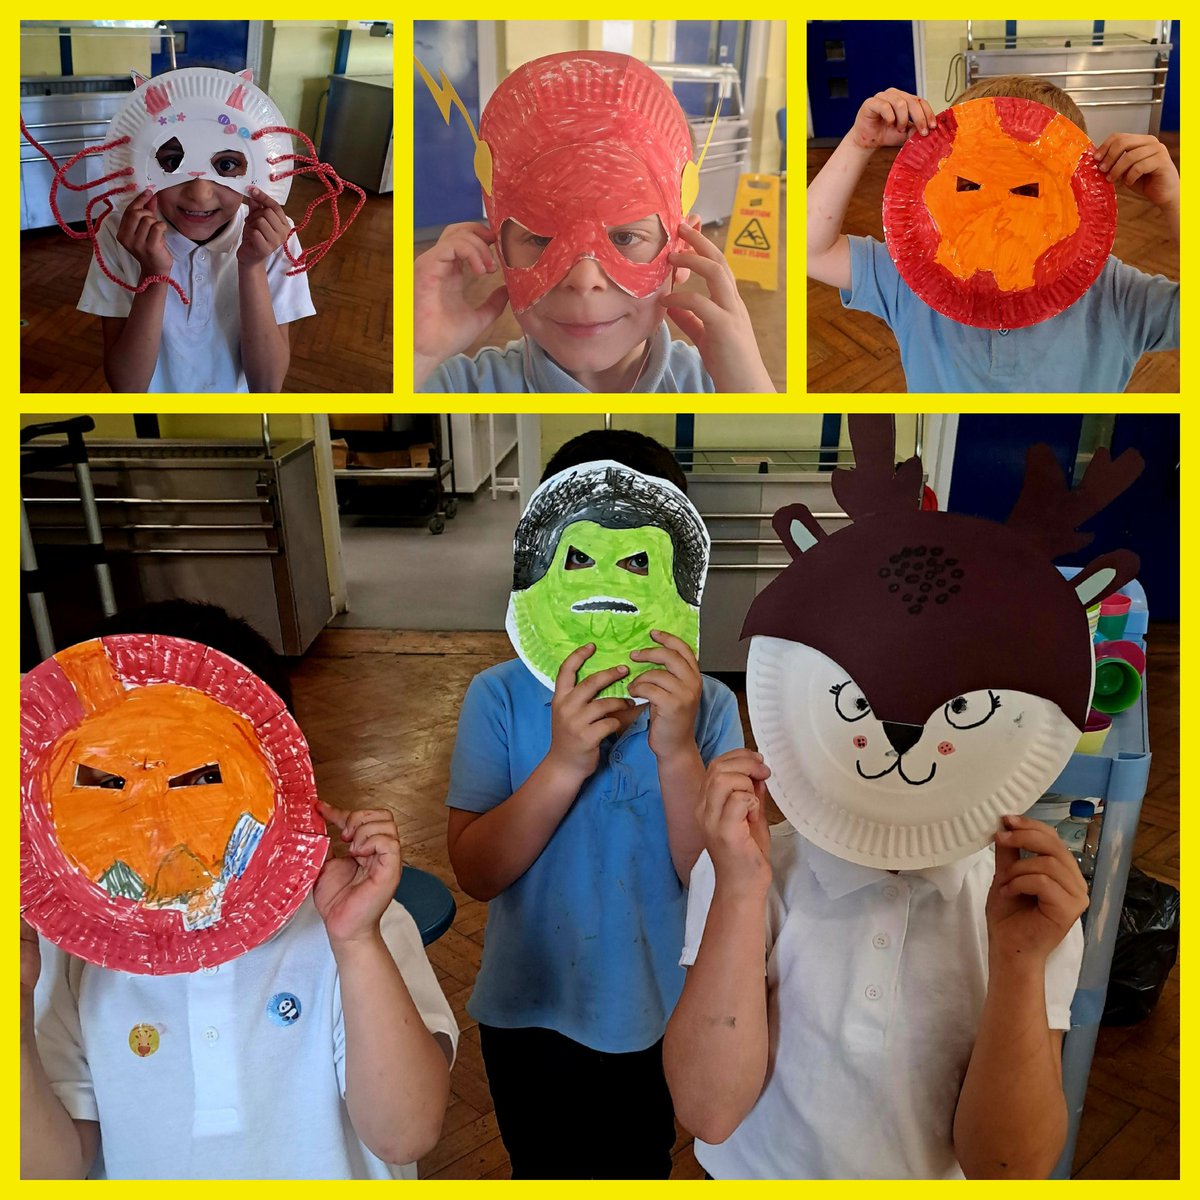 HASC: Our little ones enjoyed making masks out of paper plates. Can you guess which character they transformed into?